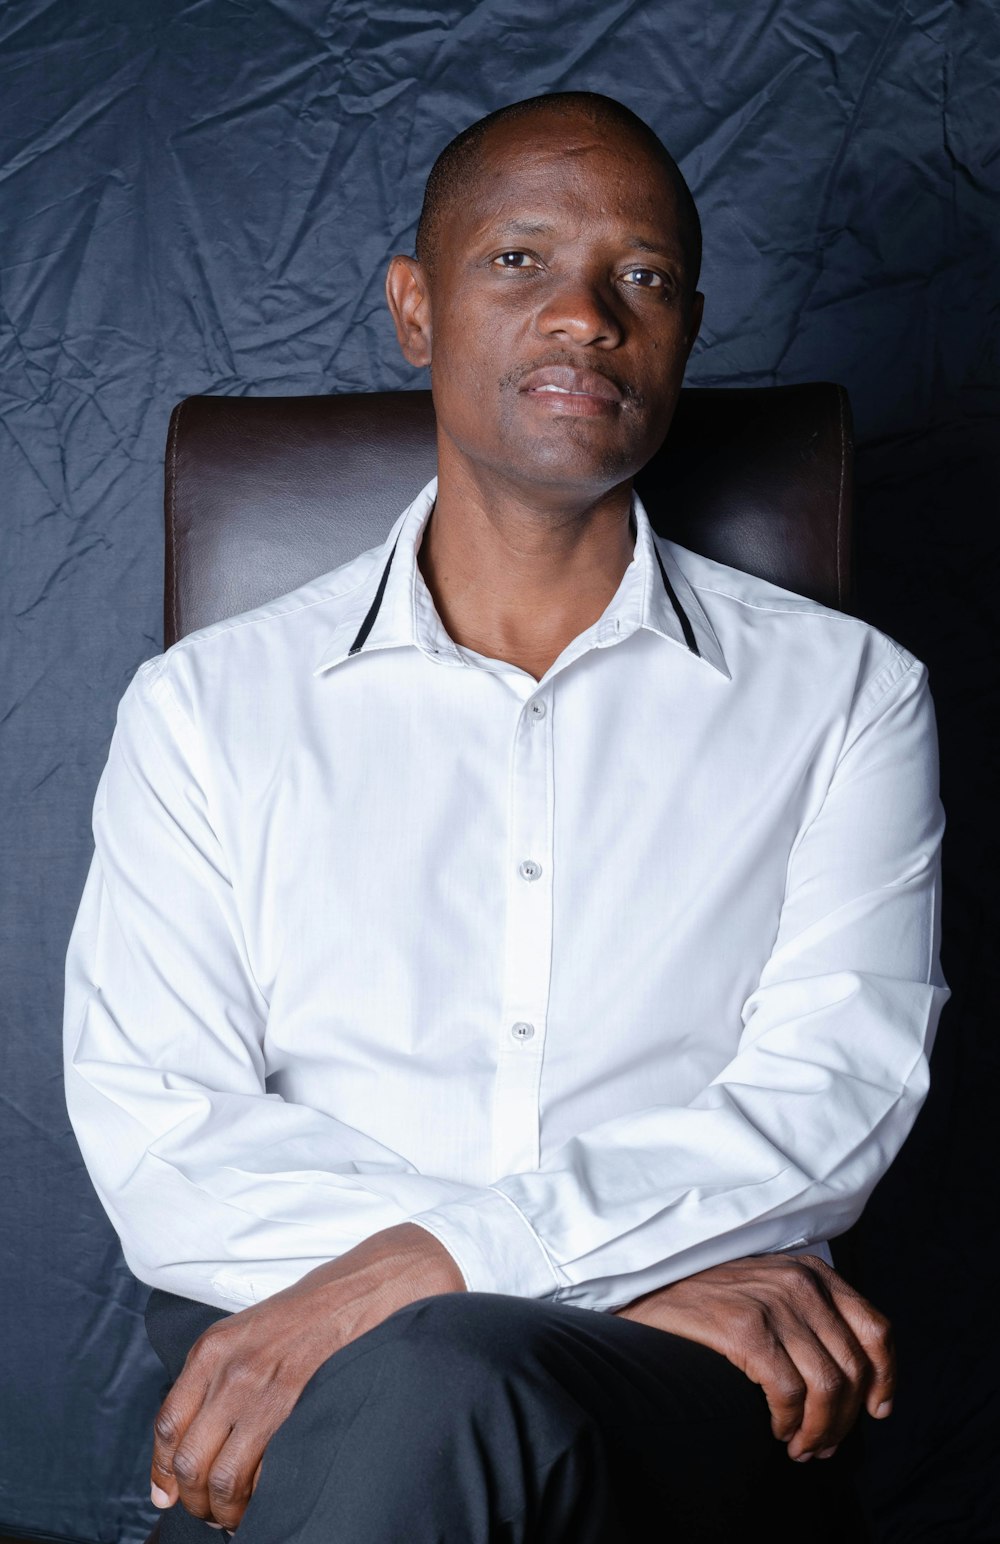 man in white dress shirt sitting on black leather chair